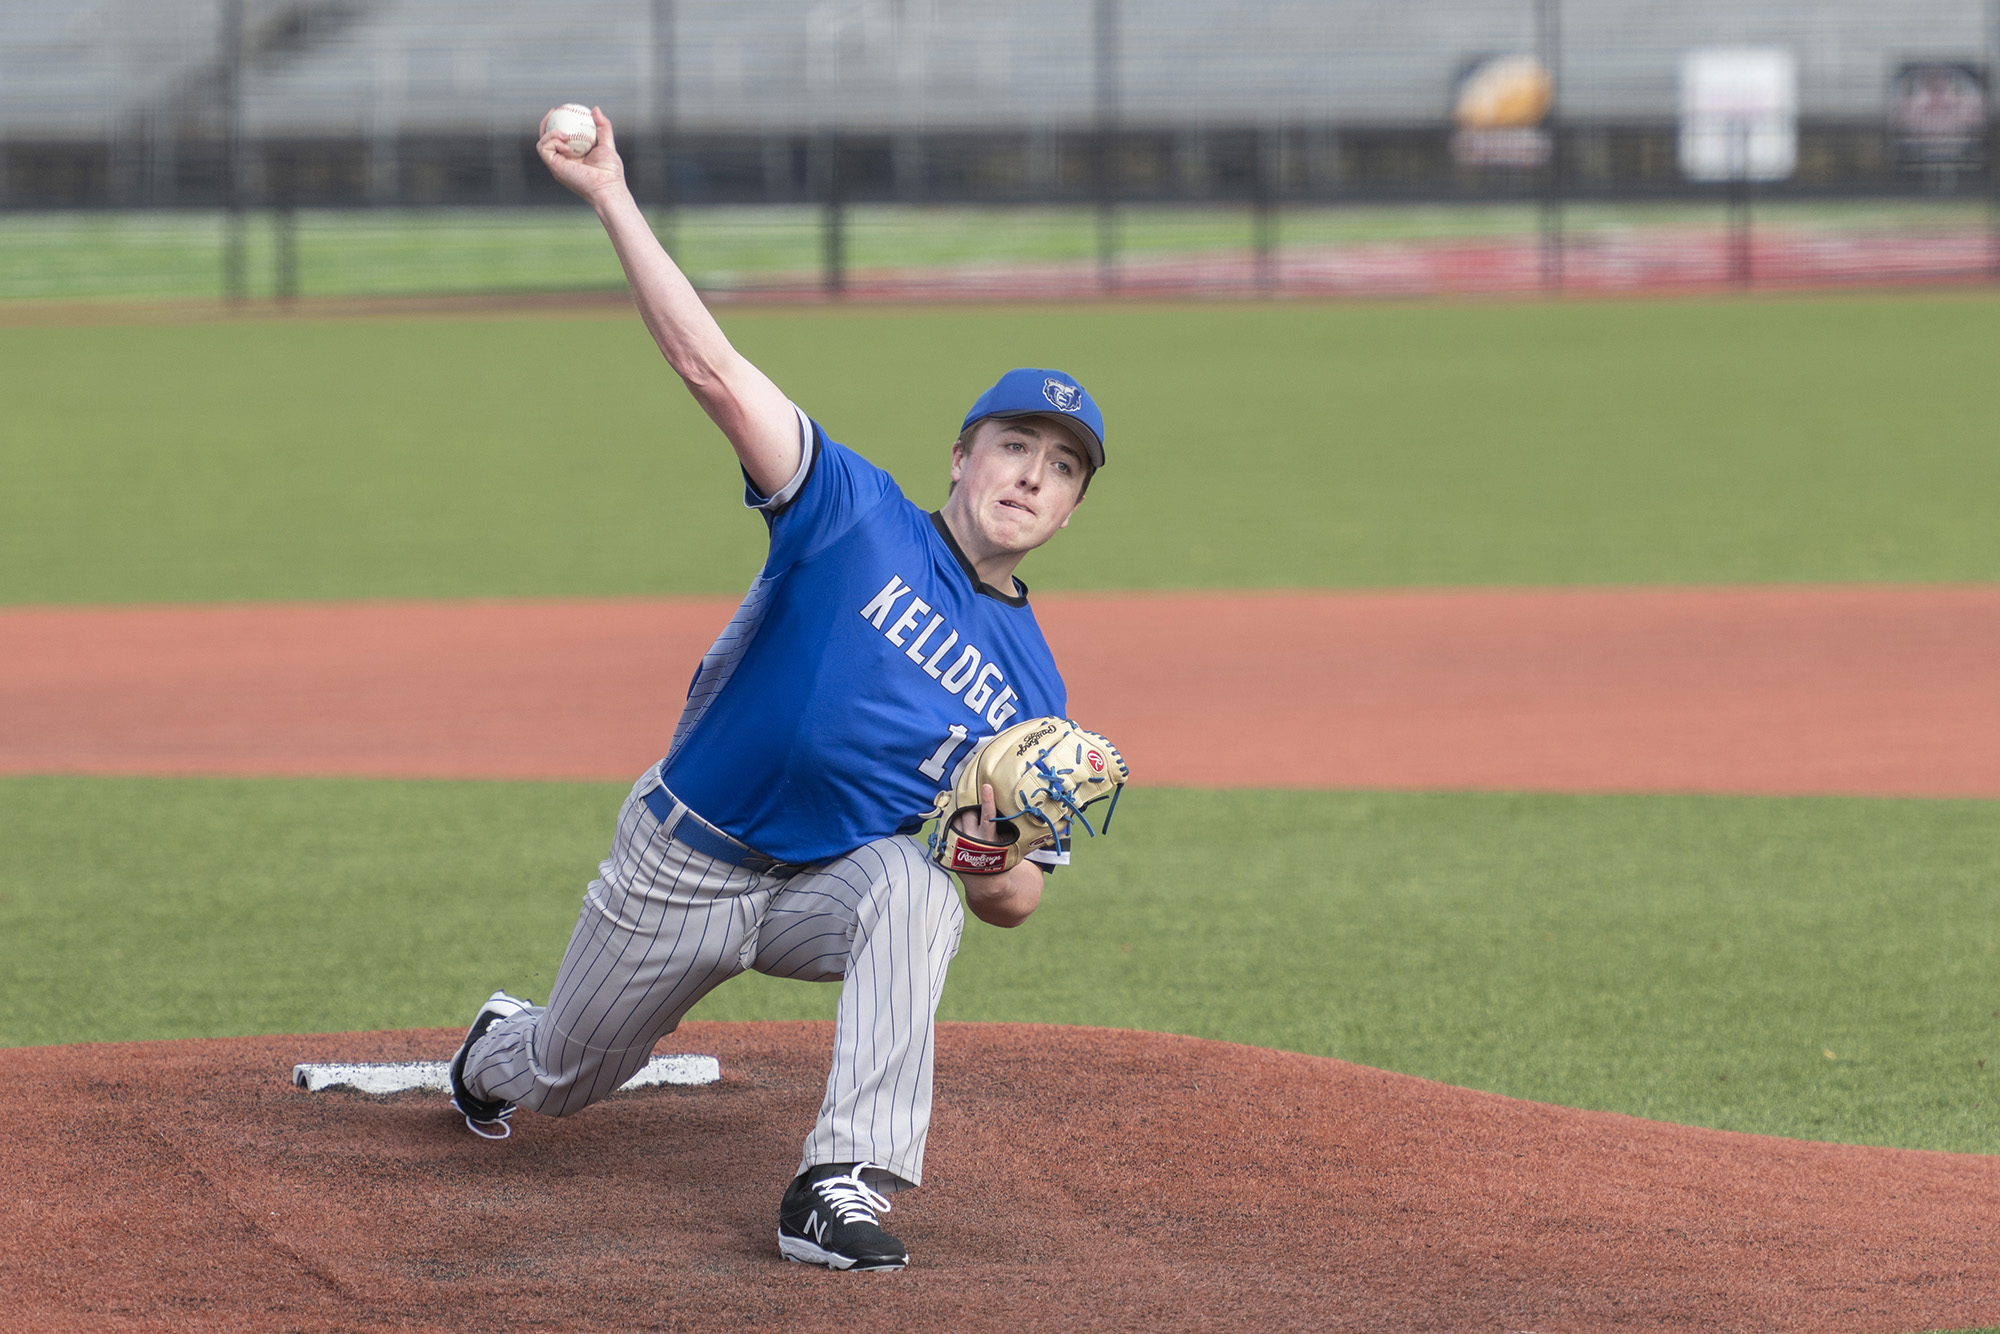 A KCC pitcher pitches during a game.